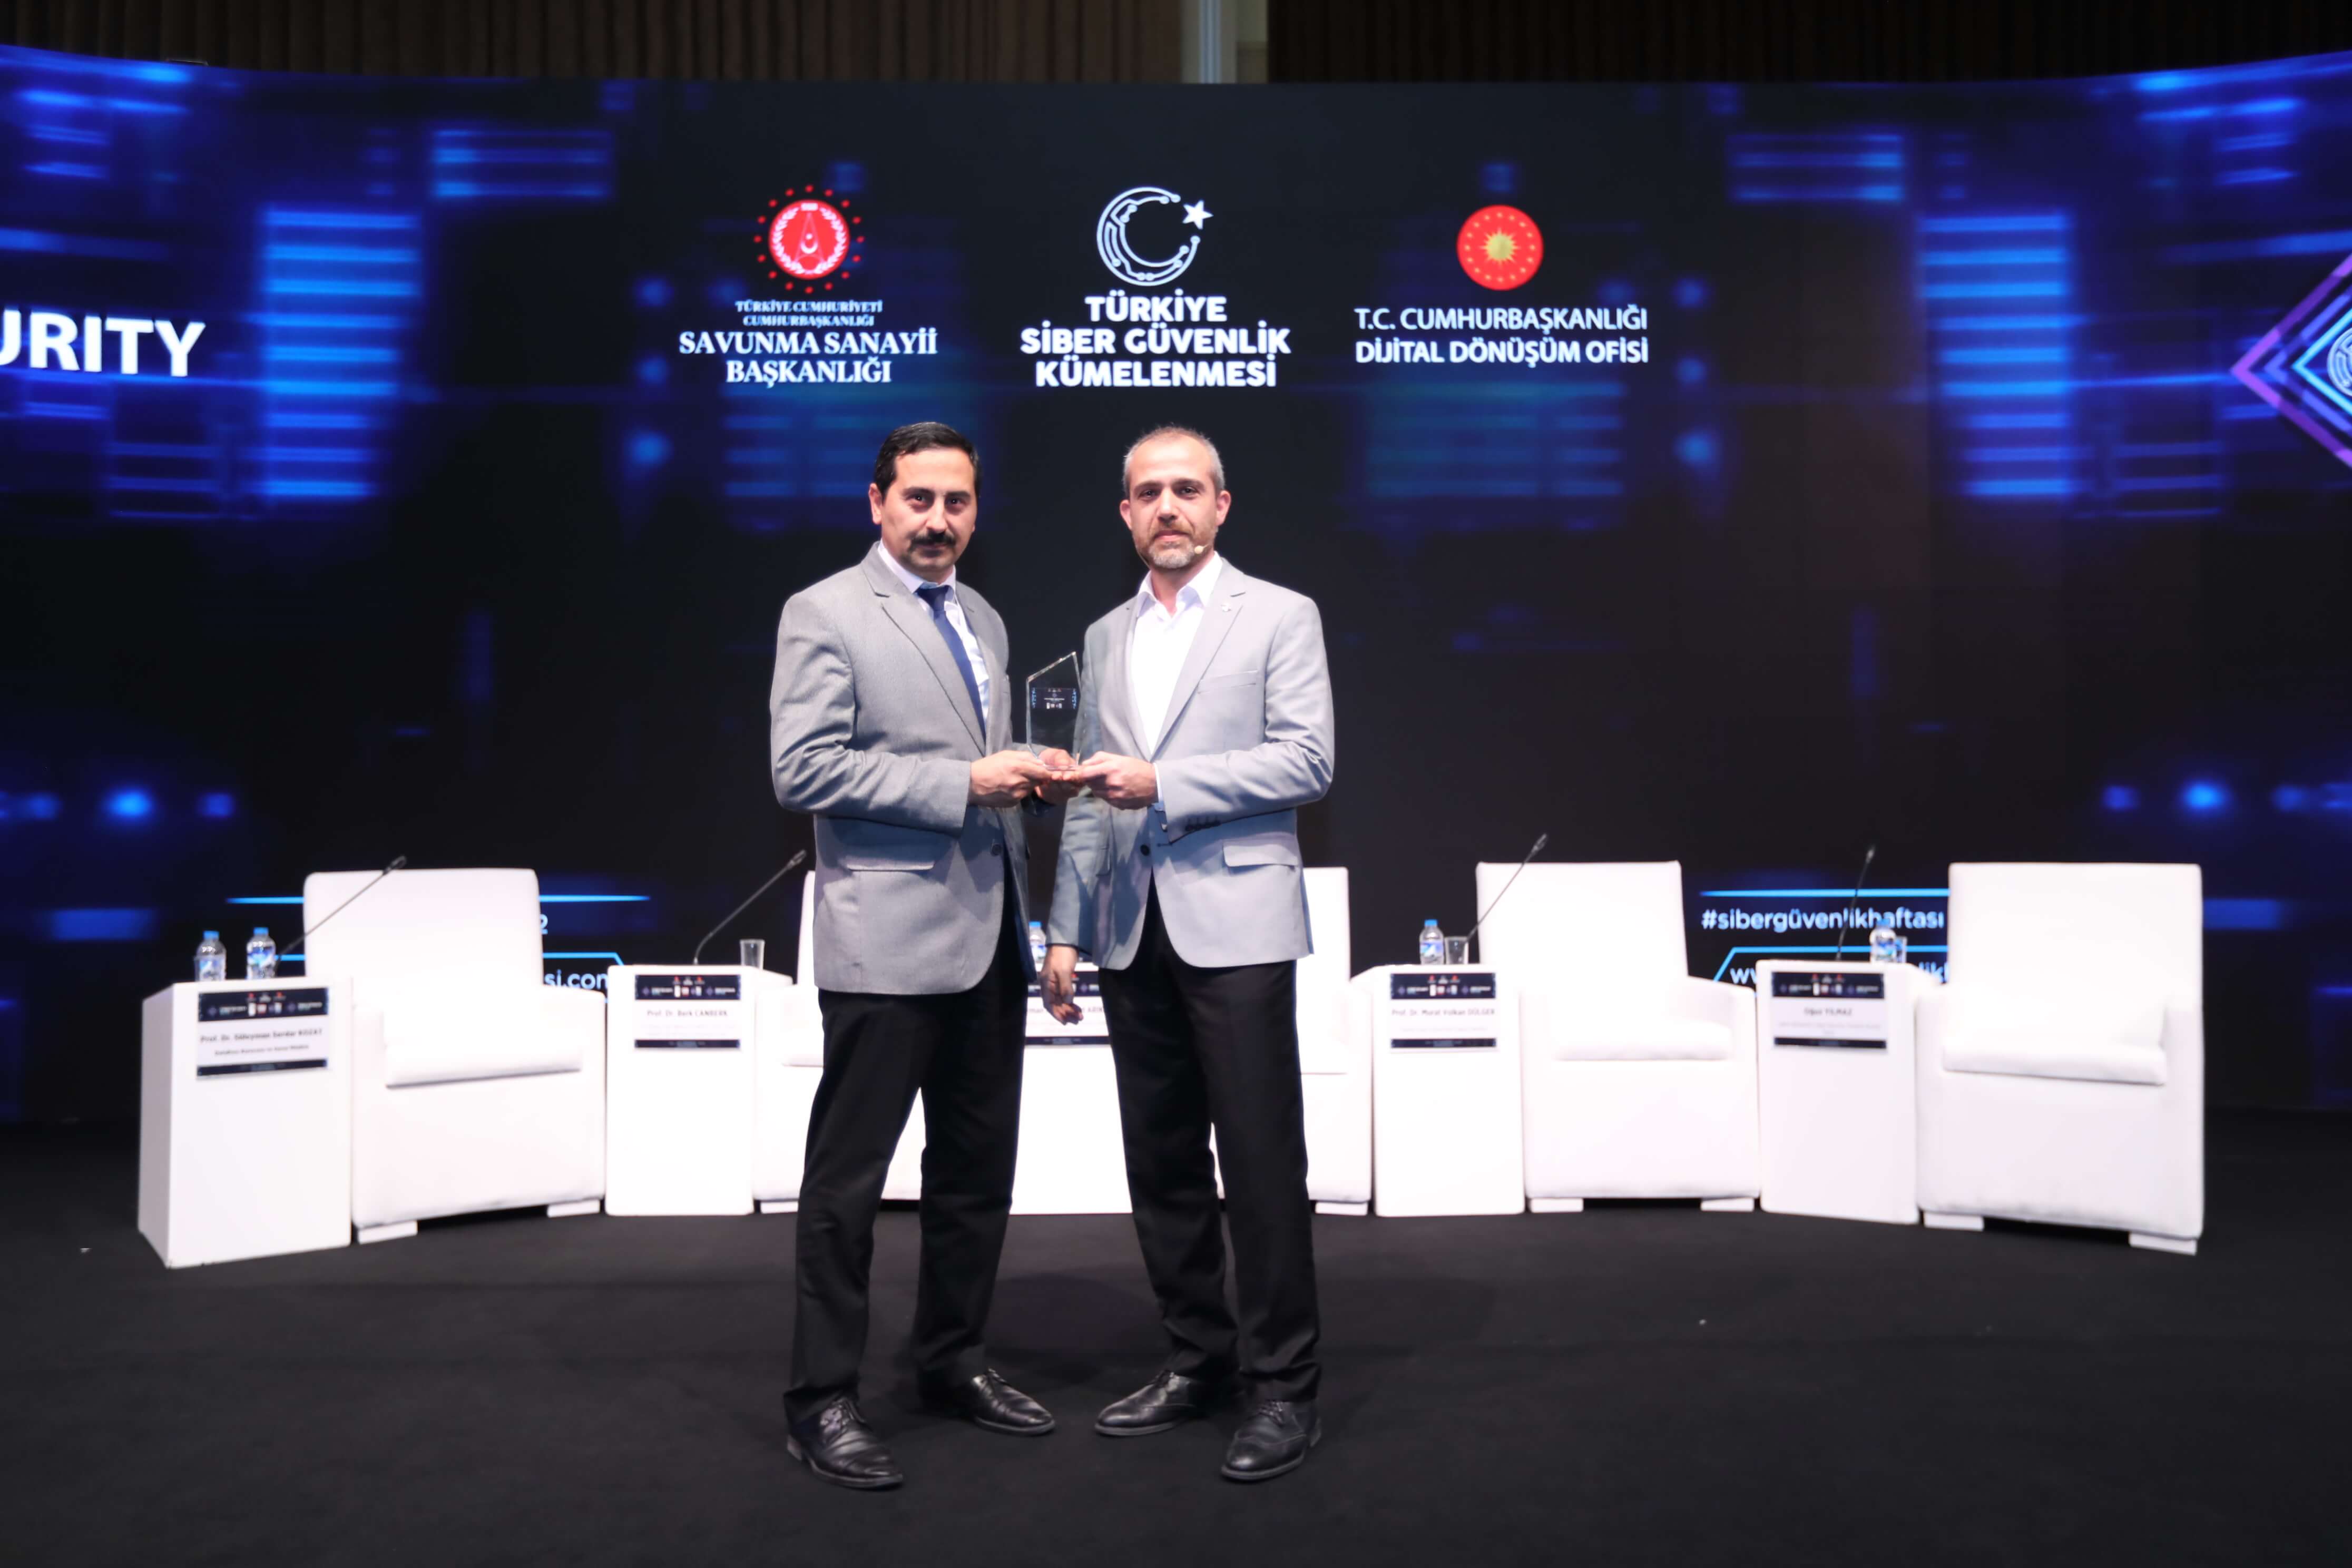 Turkish Technology Attends Cyber Security Week Event